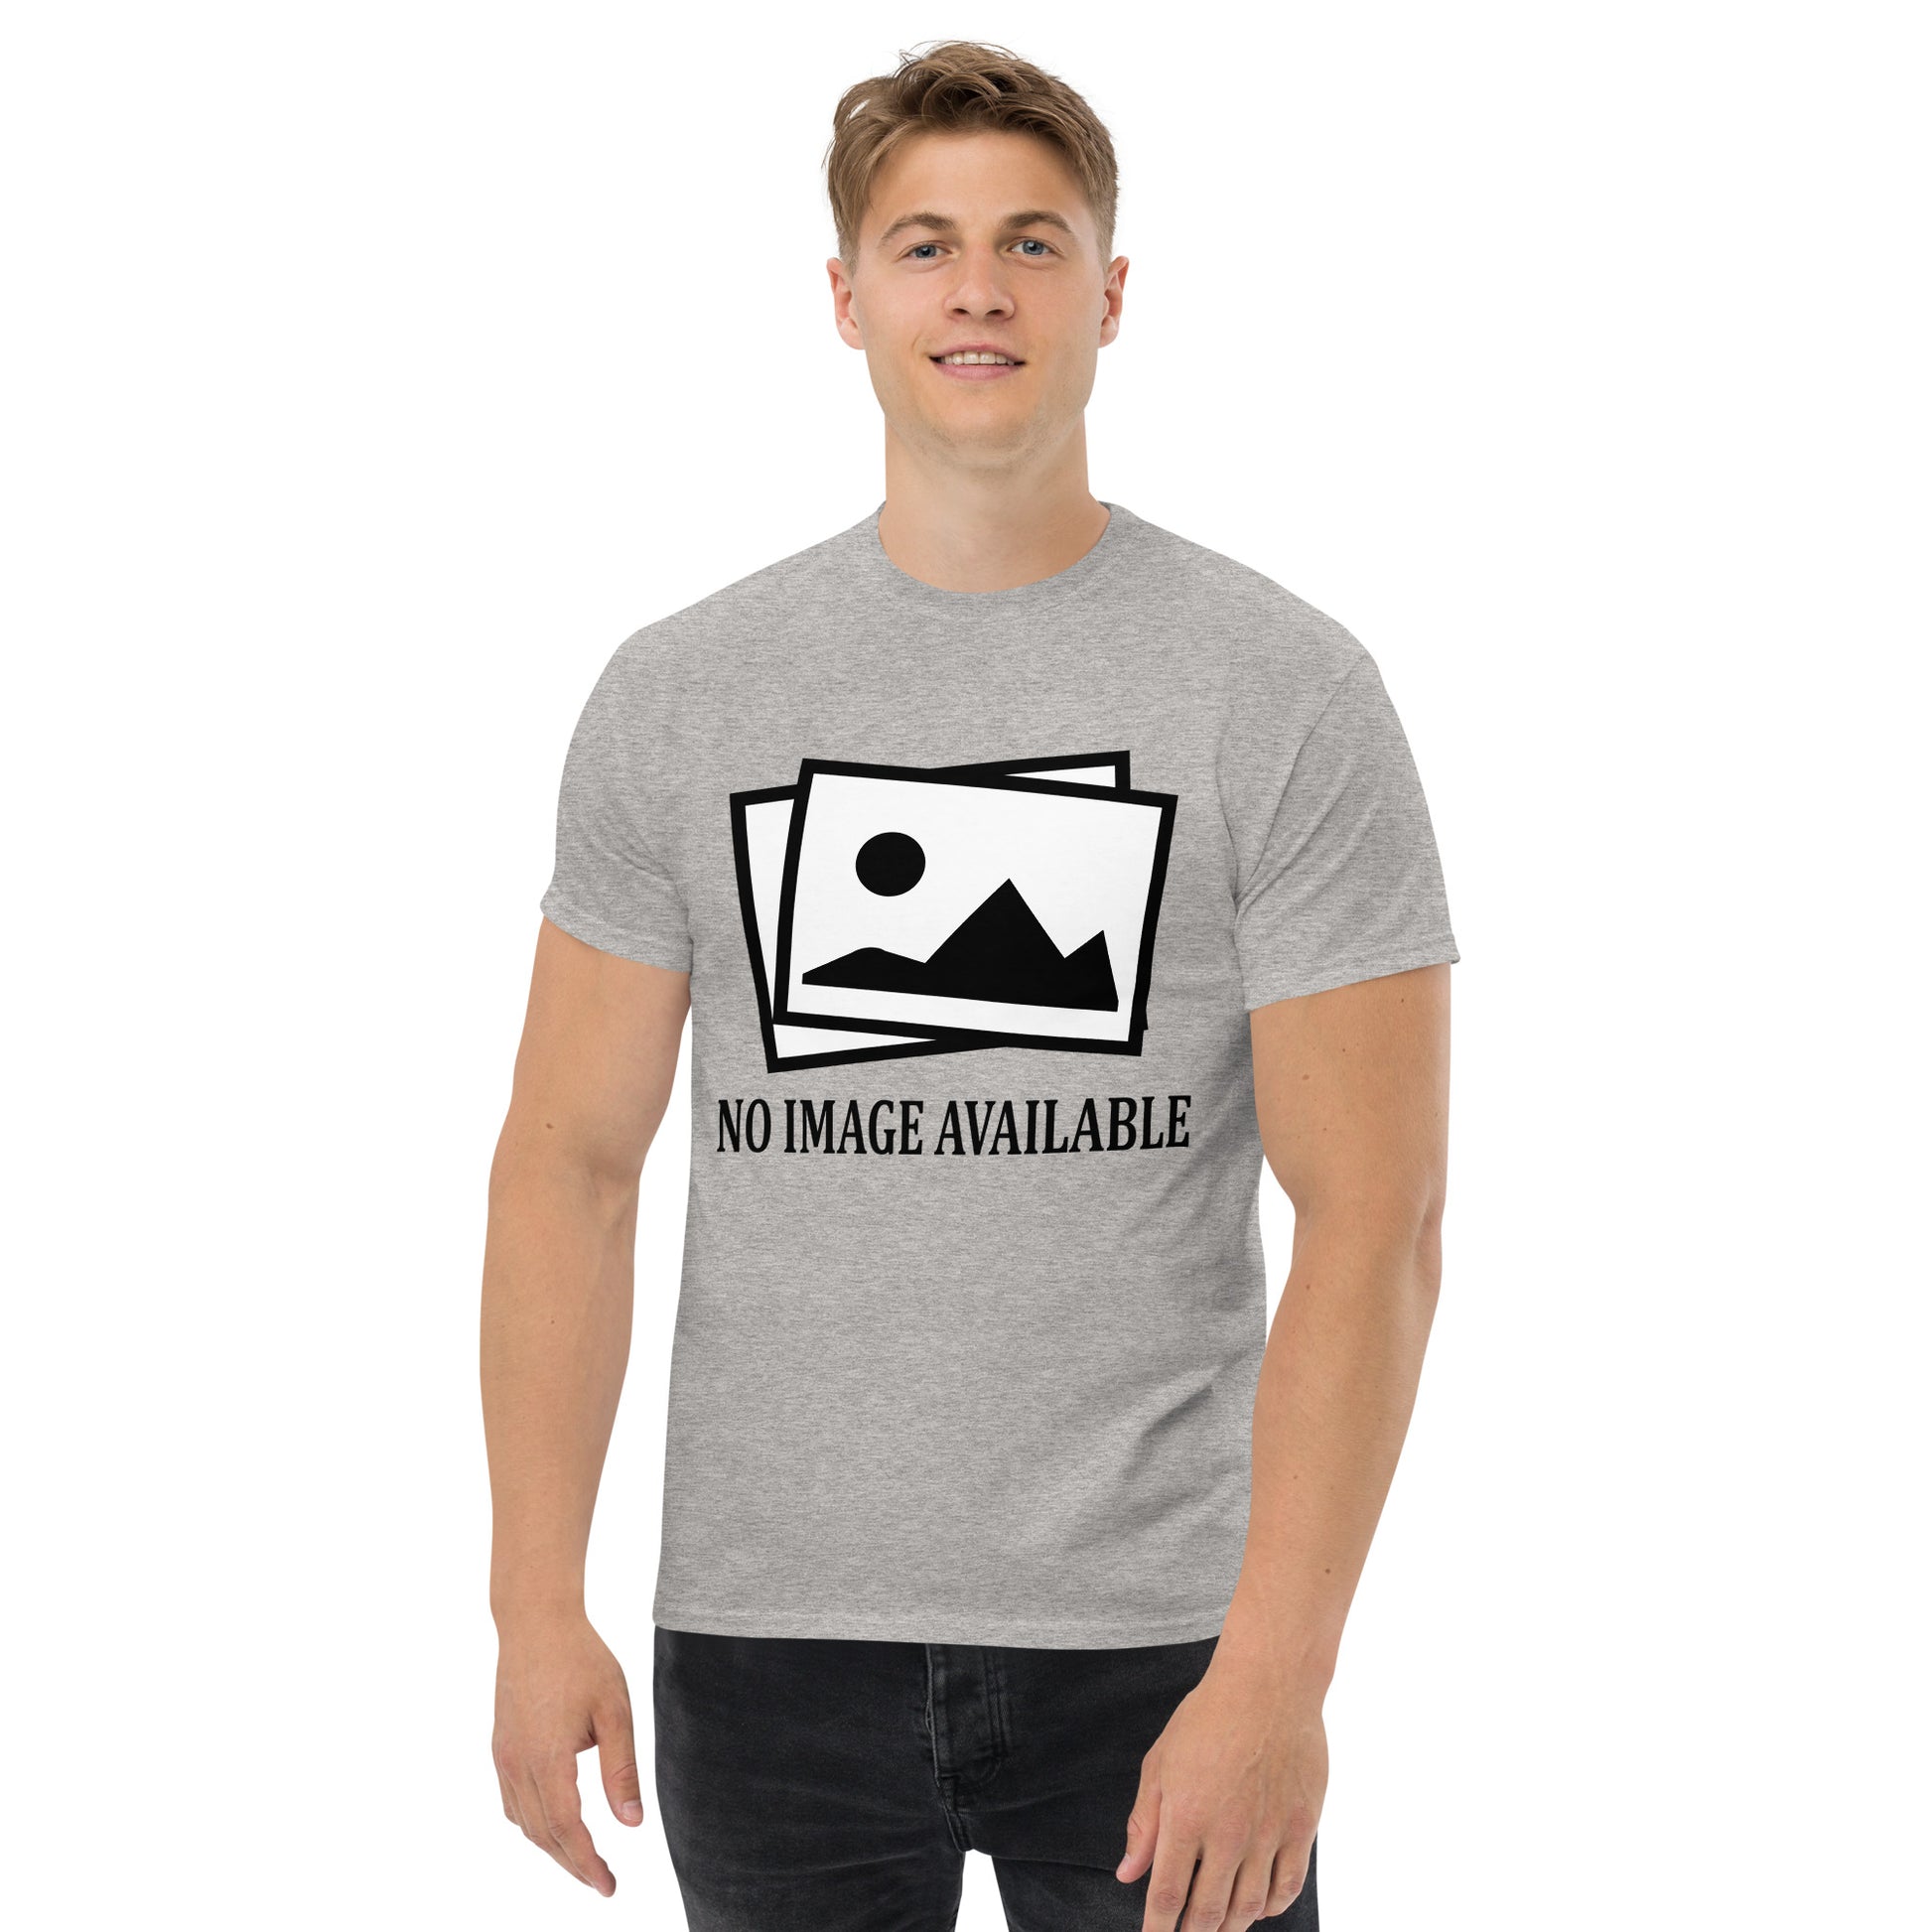 Men with grey t-shirt with image and text "no image available"